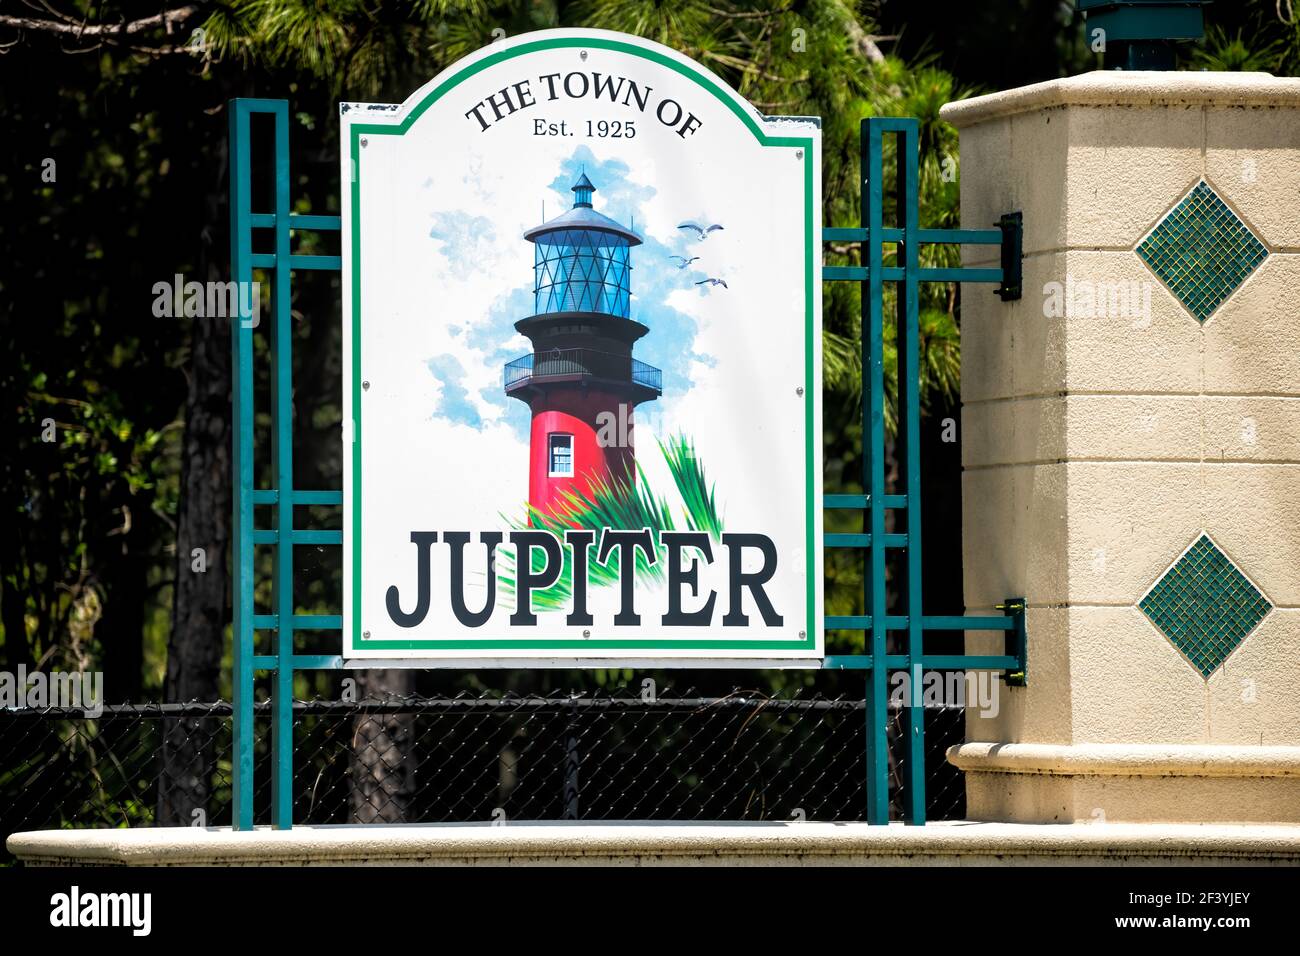 Jupiter, USA - May 9, 2018: Welcome sign to Florida small city town in Palm Beach county established in 1925 on Atlantic ocean coast shore in summer Stock Photo